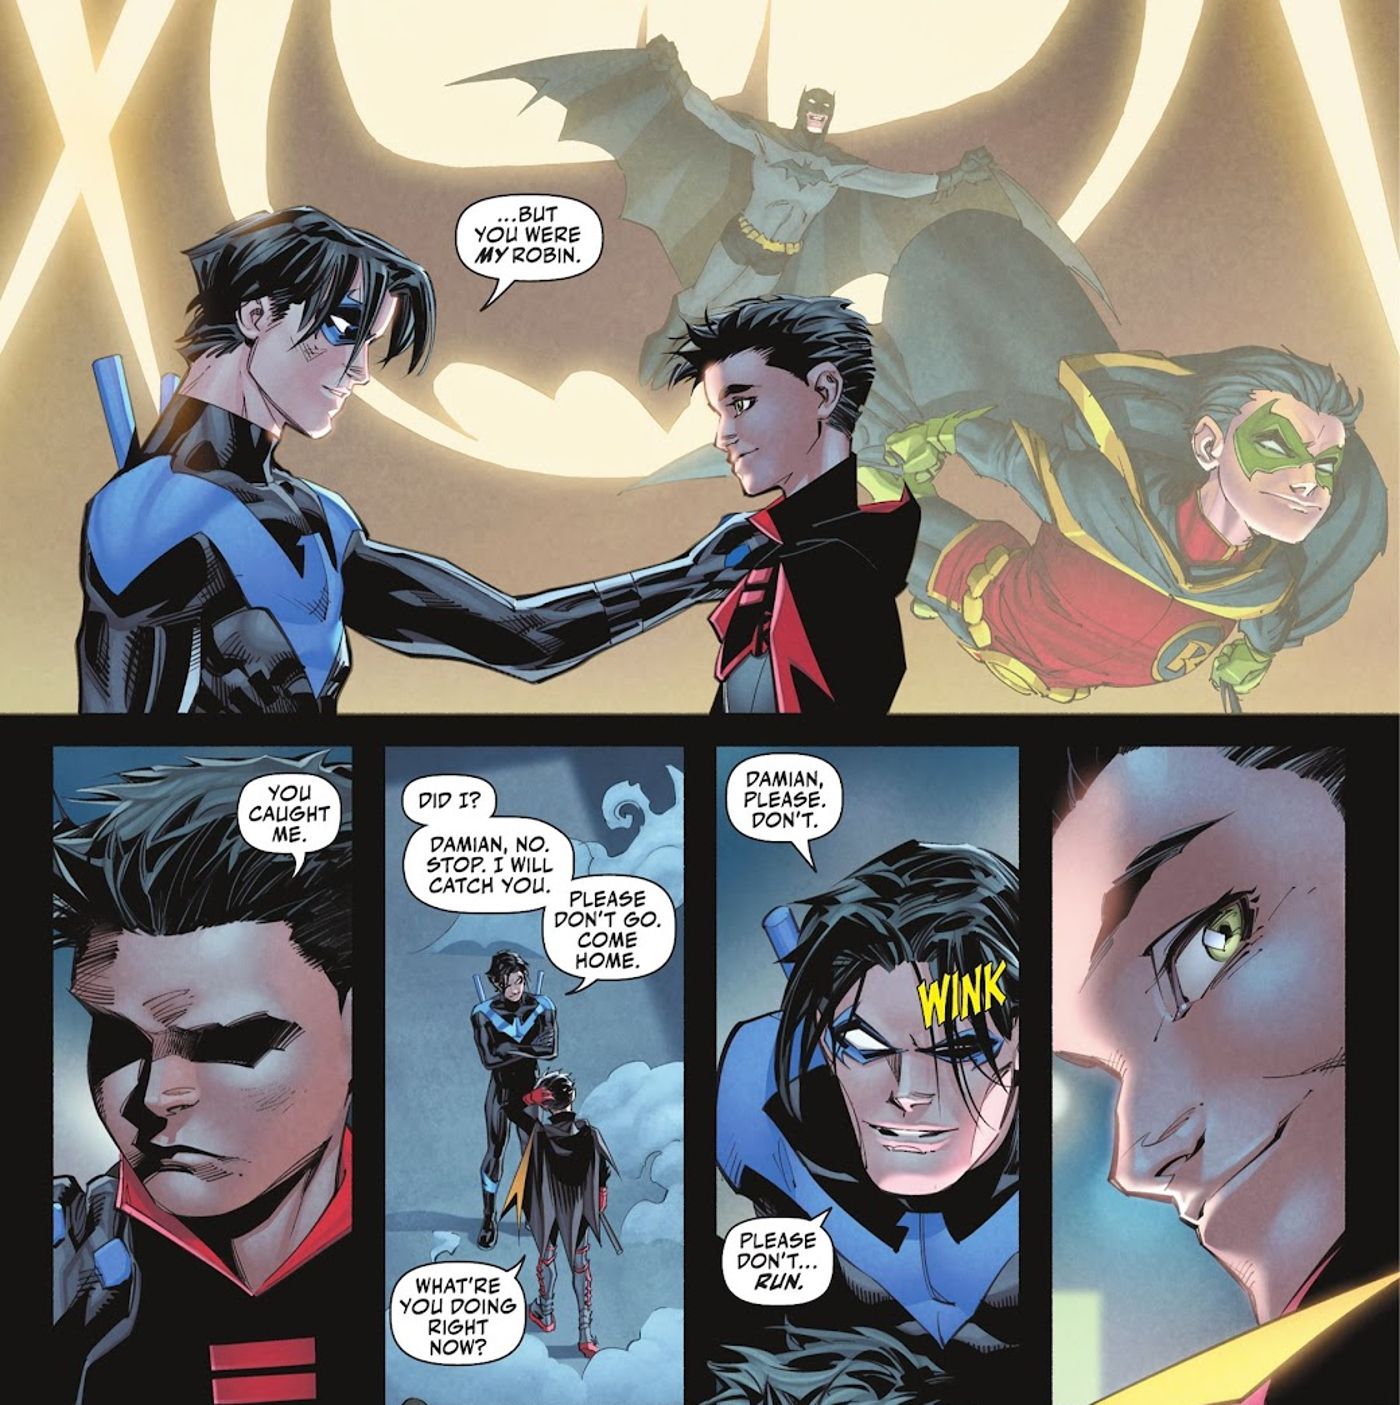 Nightwing tells Damian Wayne that he was his Robin and lets him go run away. 